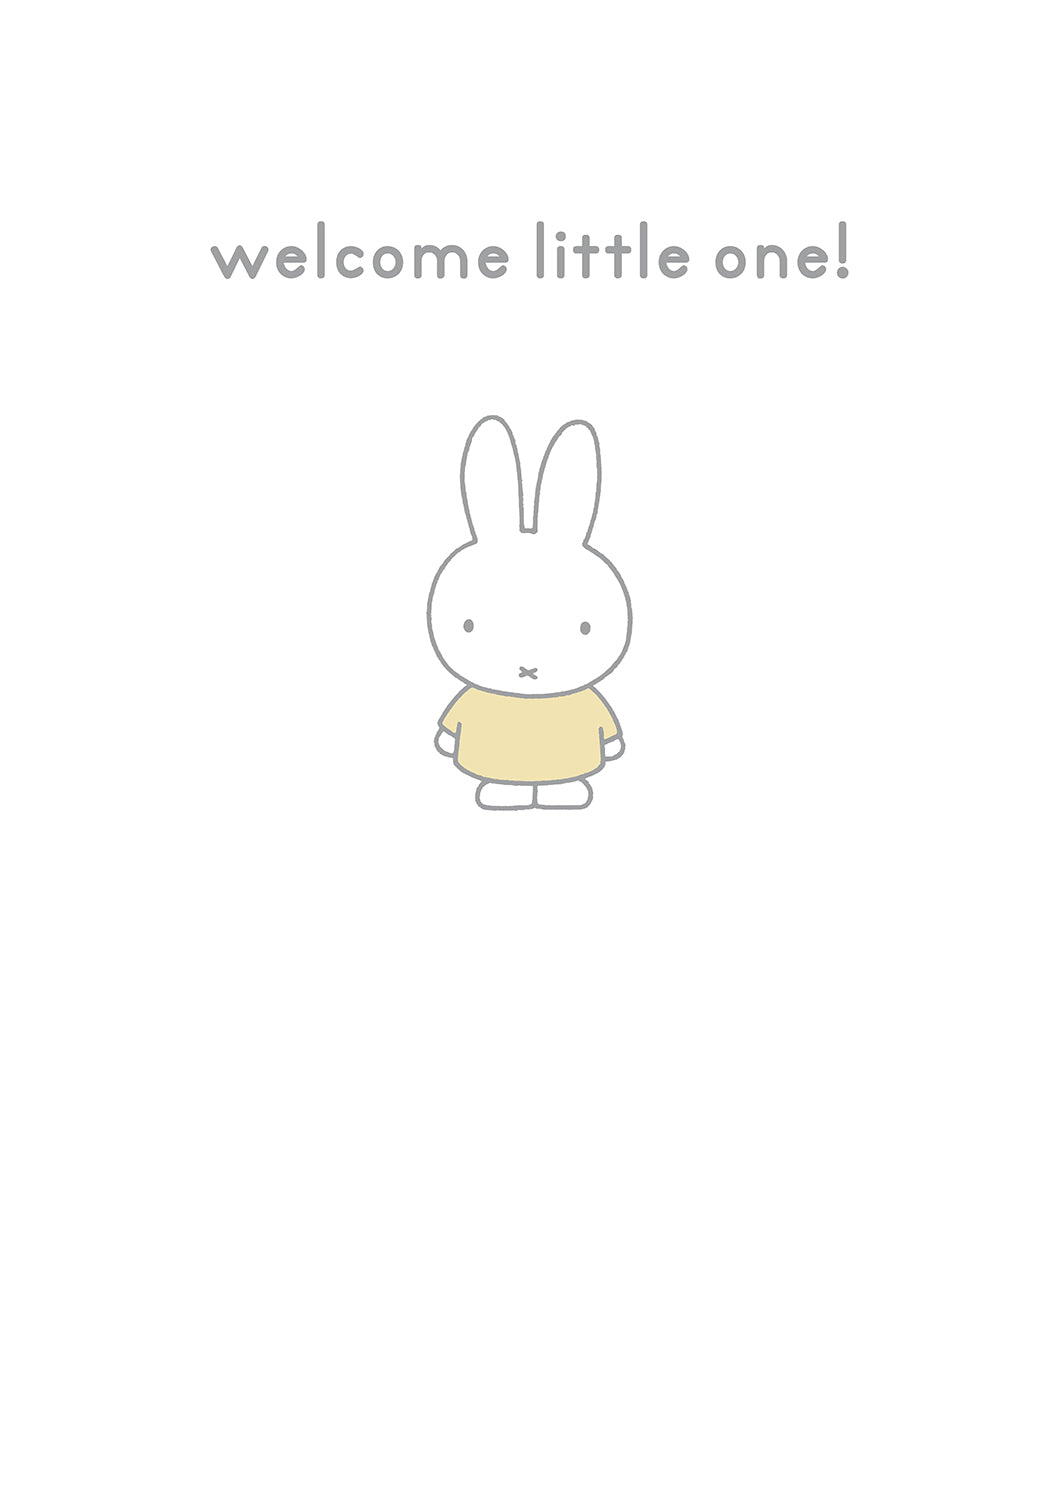 Greeting Card: Miffy - Welcome Little One!